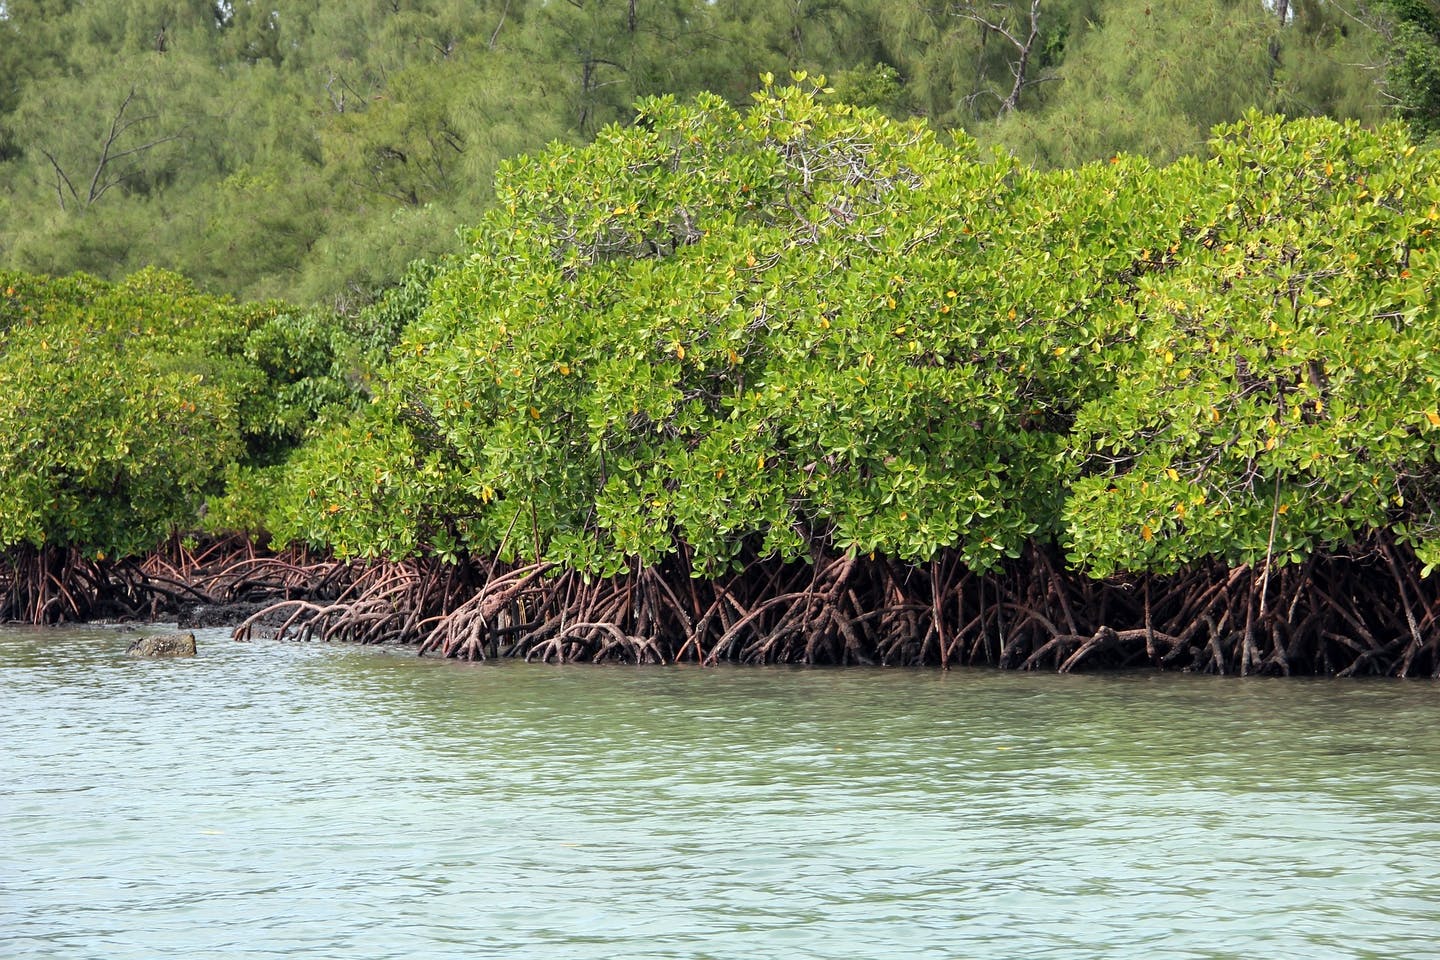 Experts share critical lessons on saving mangroves